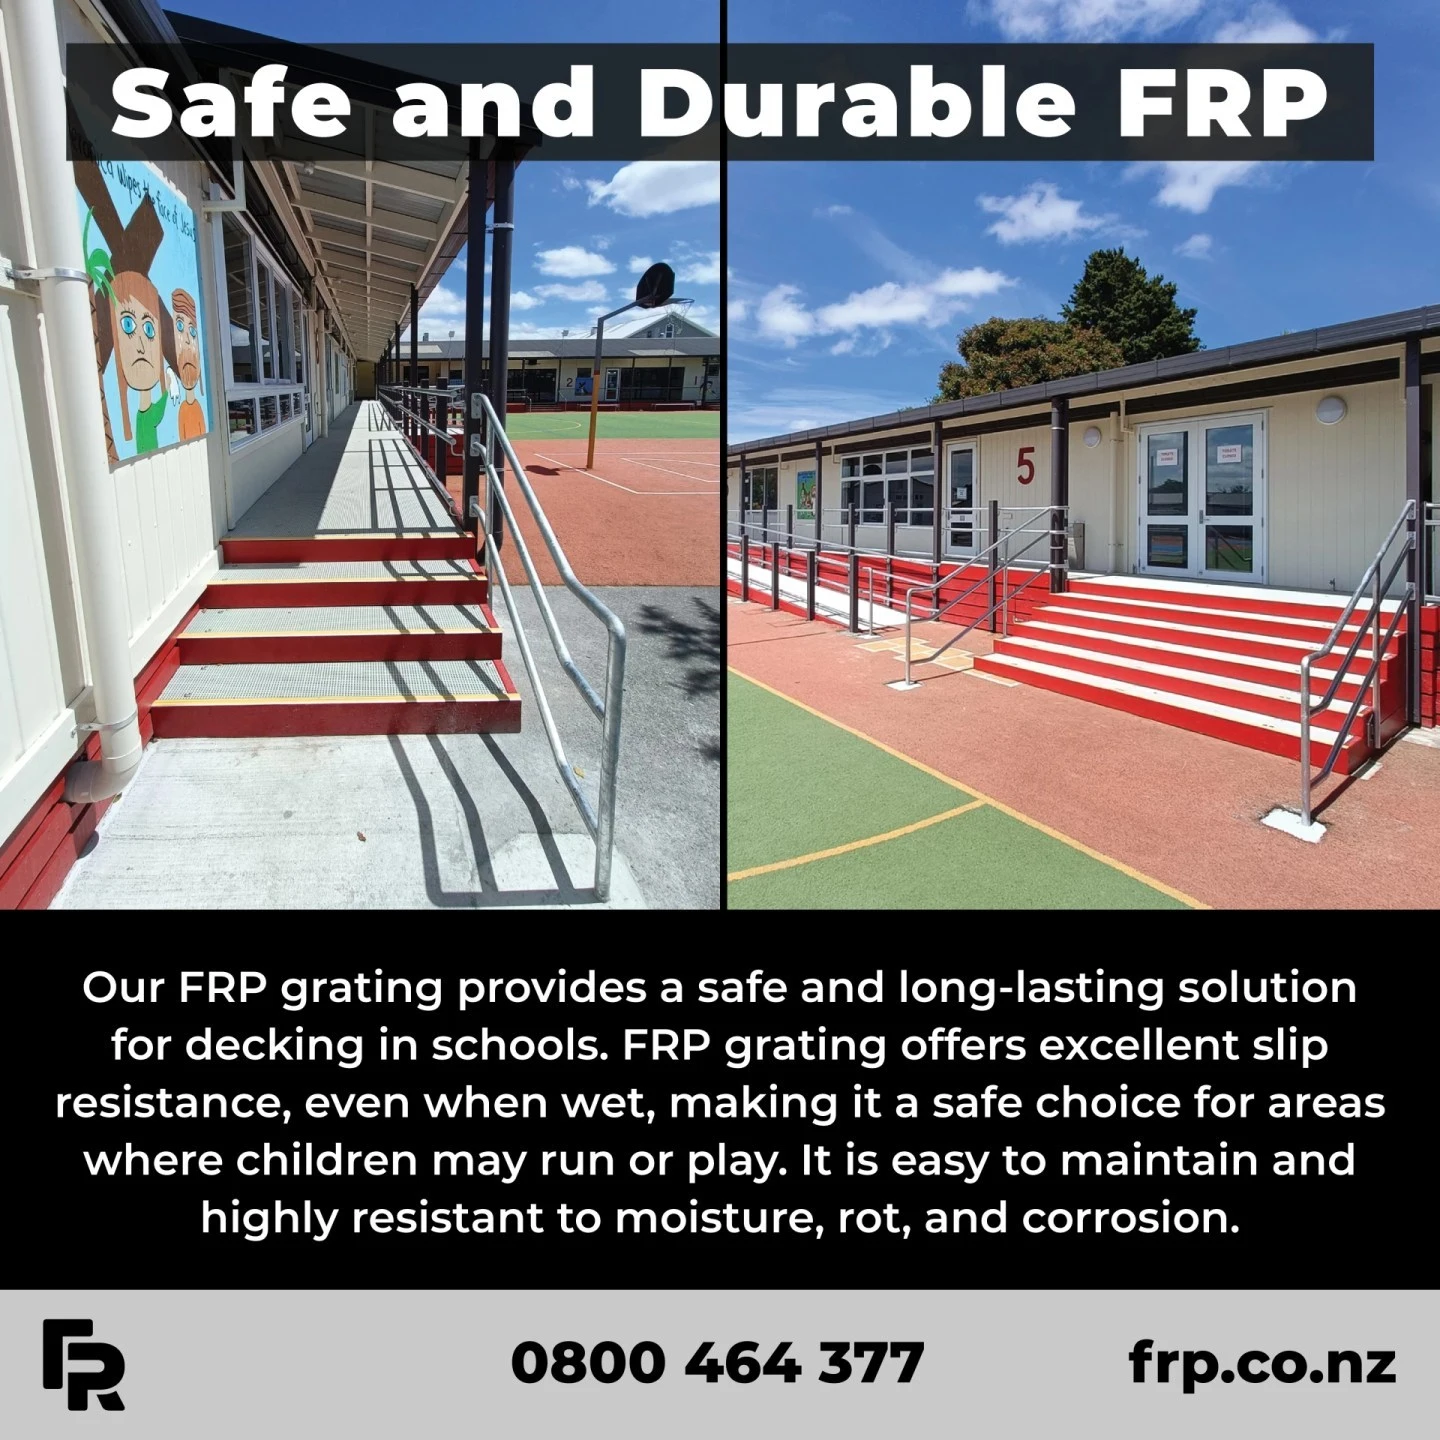 We are here to help!

#frp #frpproducts #schools #education #nzarchitecture #decking #walkways #nonslip